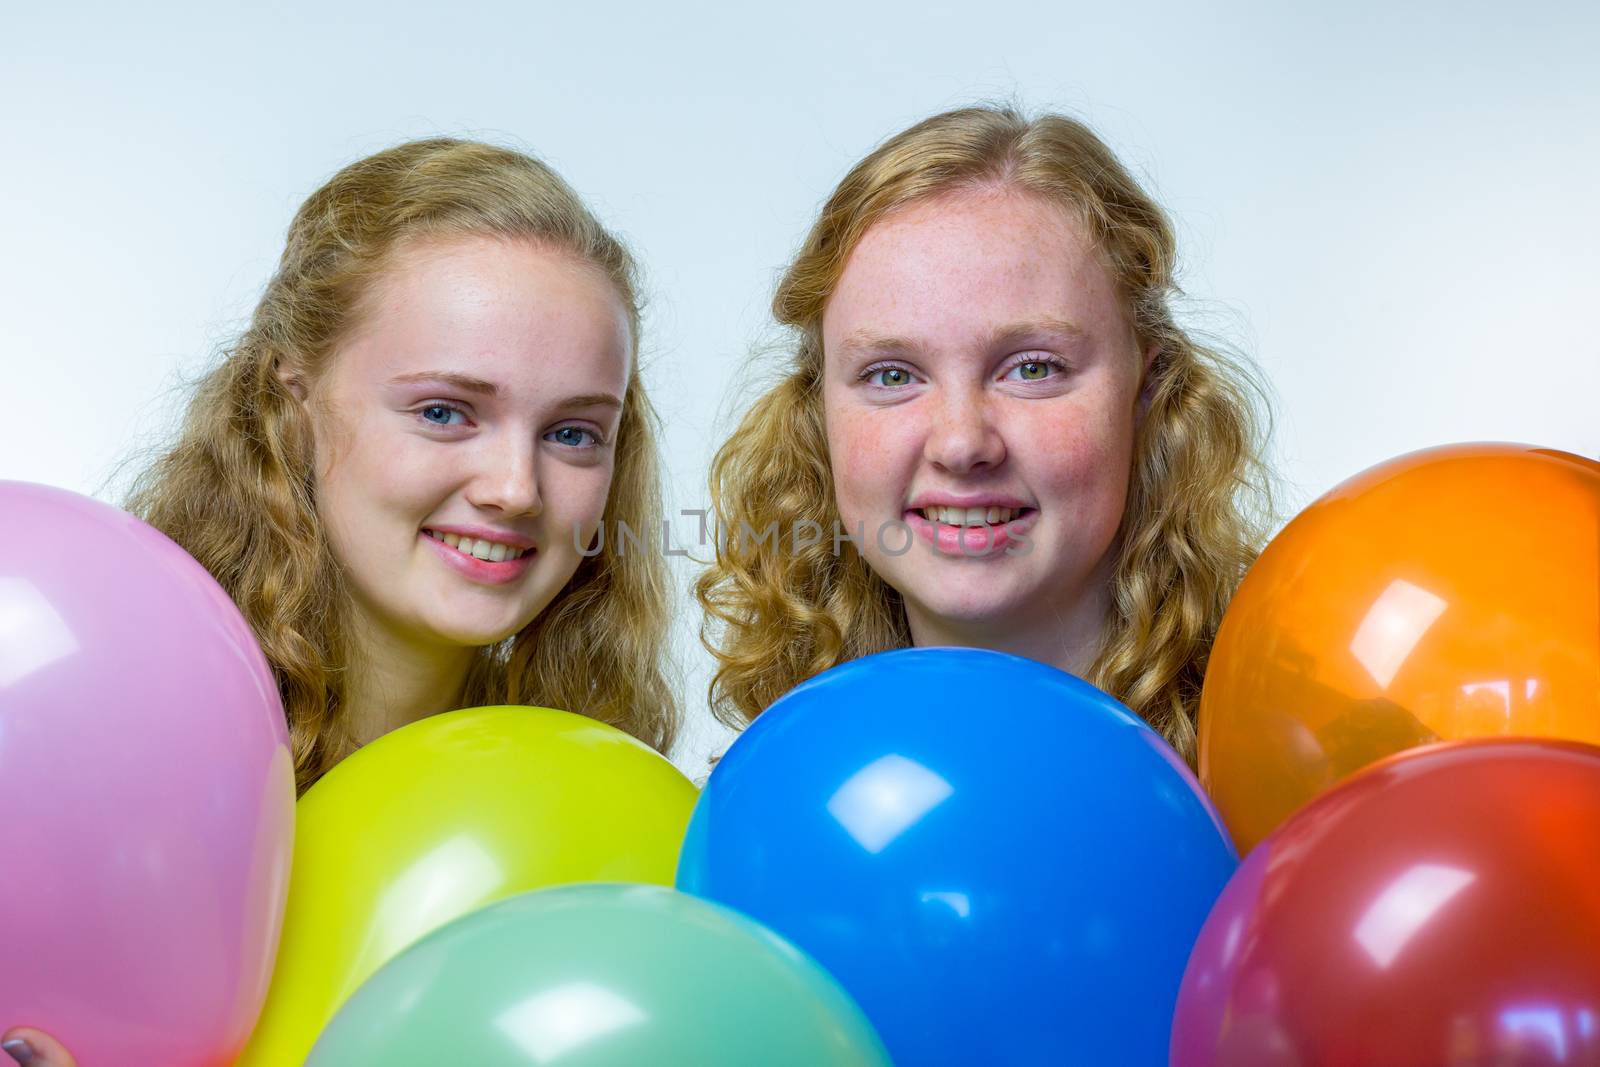 Two girls heads behind colored balloons by BenSchonewille